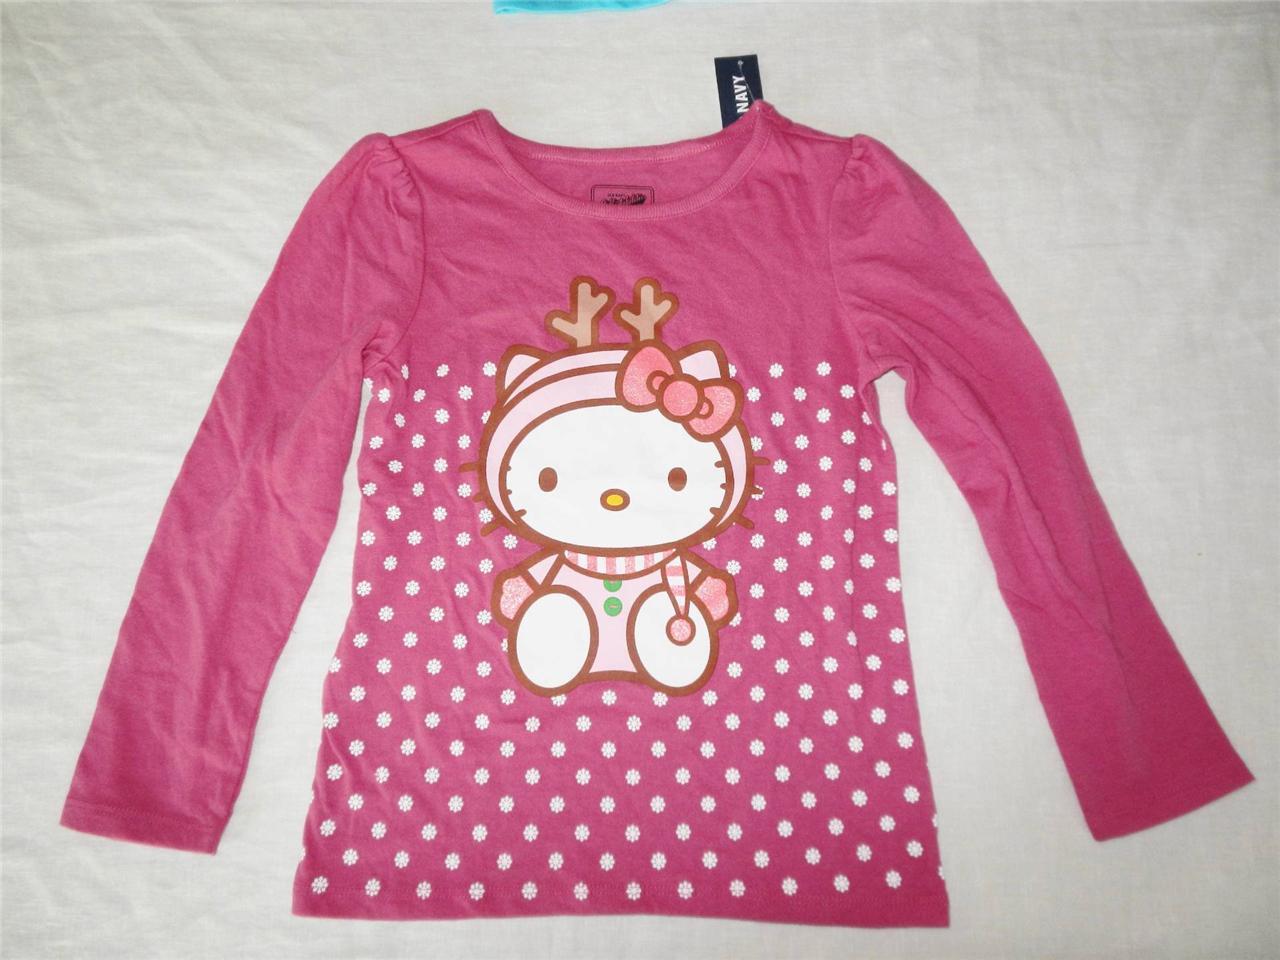 New Girl's Old Navy Collectabilitees LS Shirts Szs 12 18M 18 24M 4T 5T ...